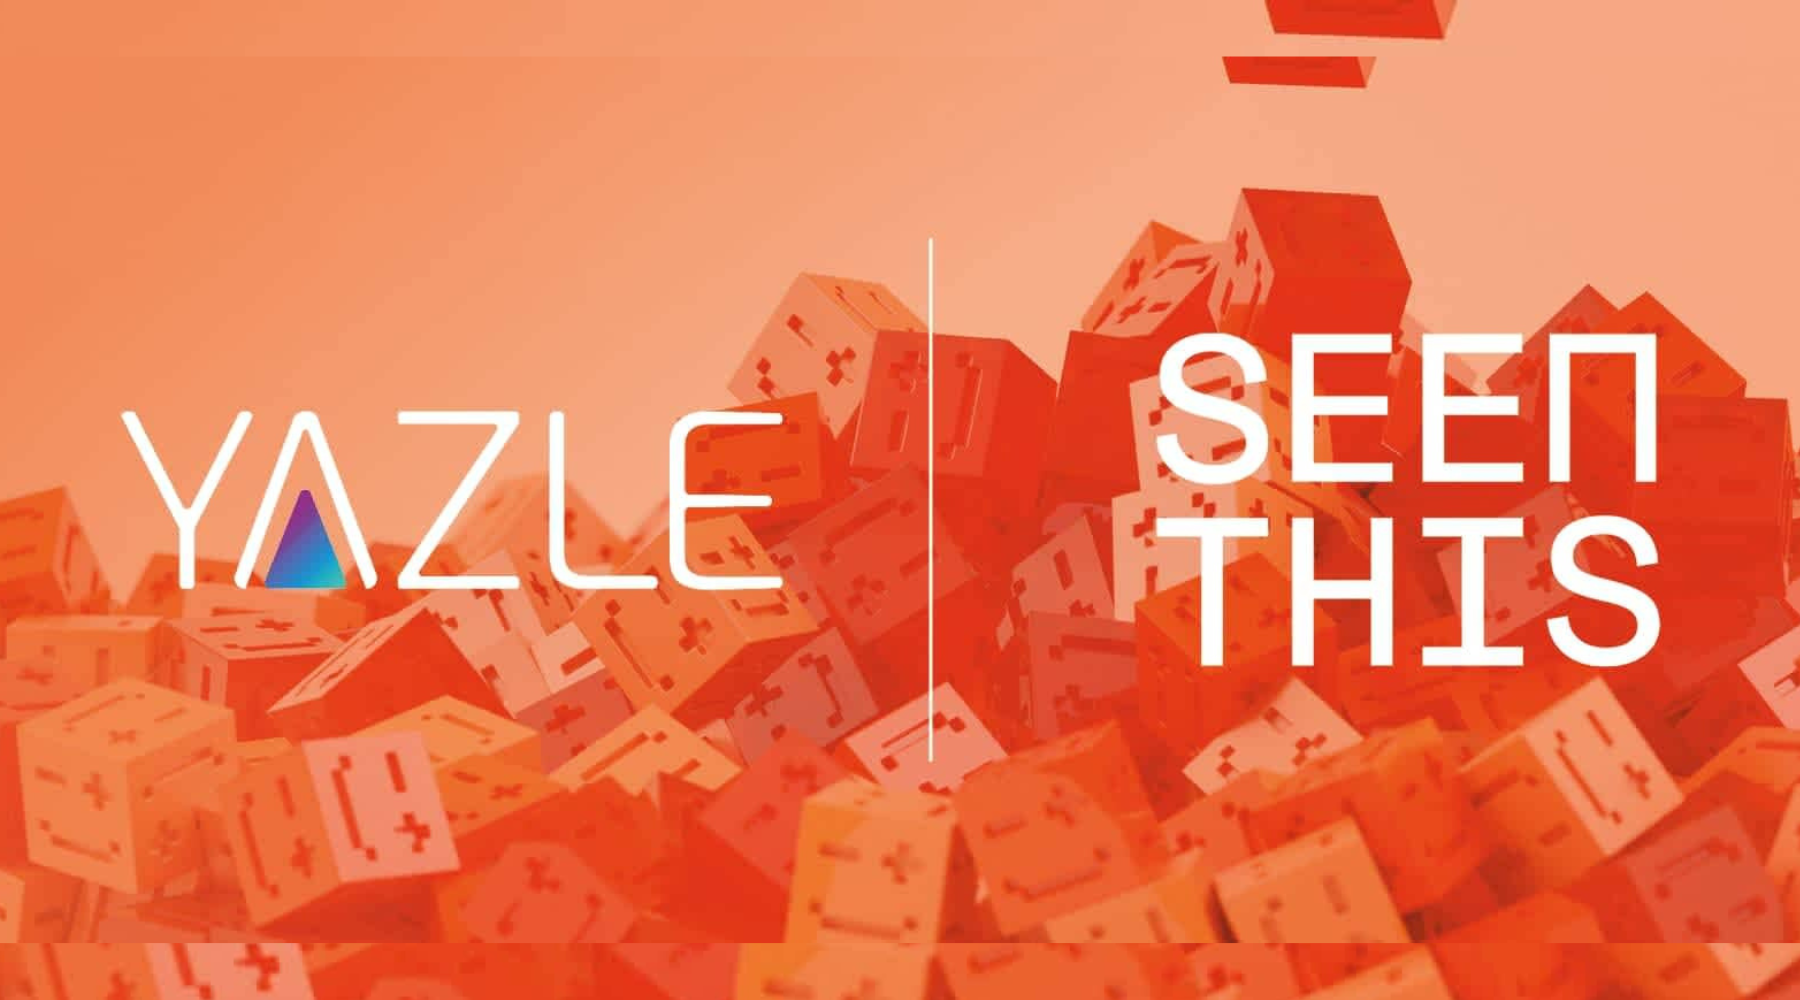 Yazle Partners with SeenThis to Avoid Excessive Carbon Emissions on Digital Ad Campaigns